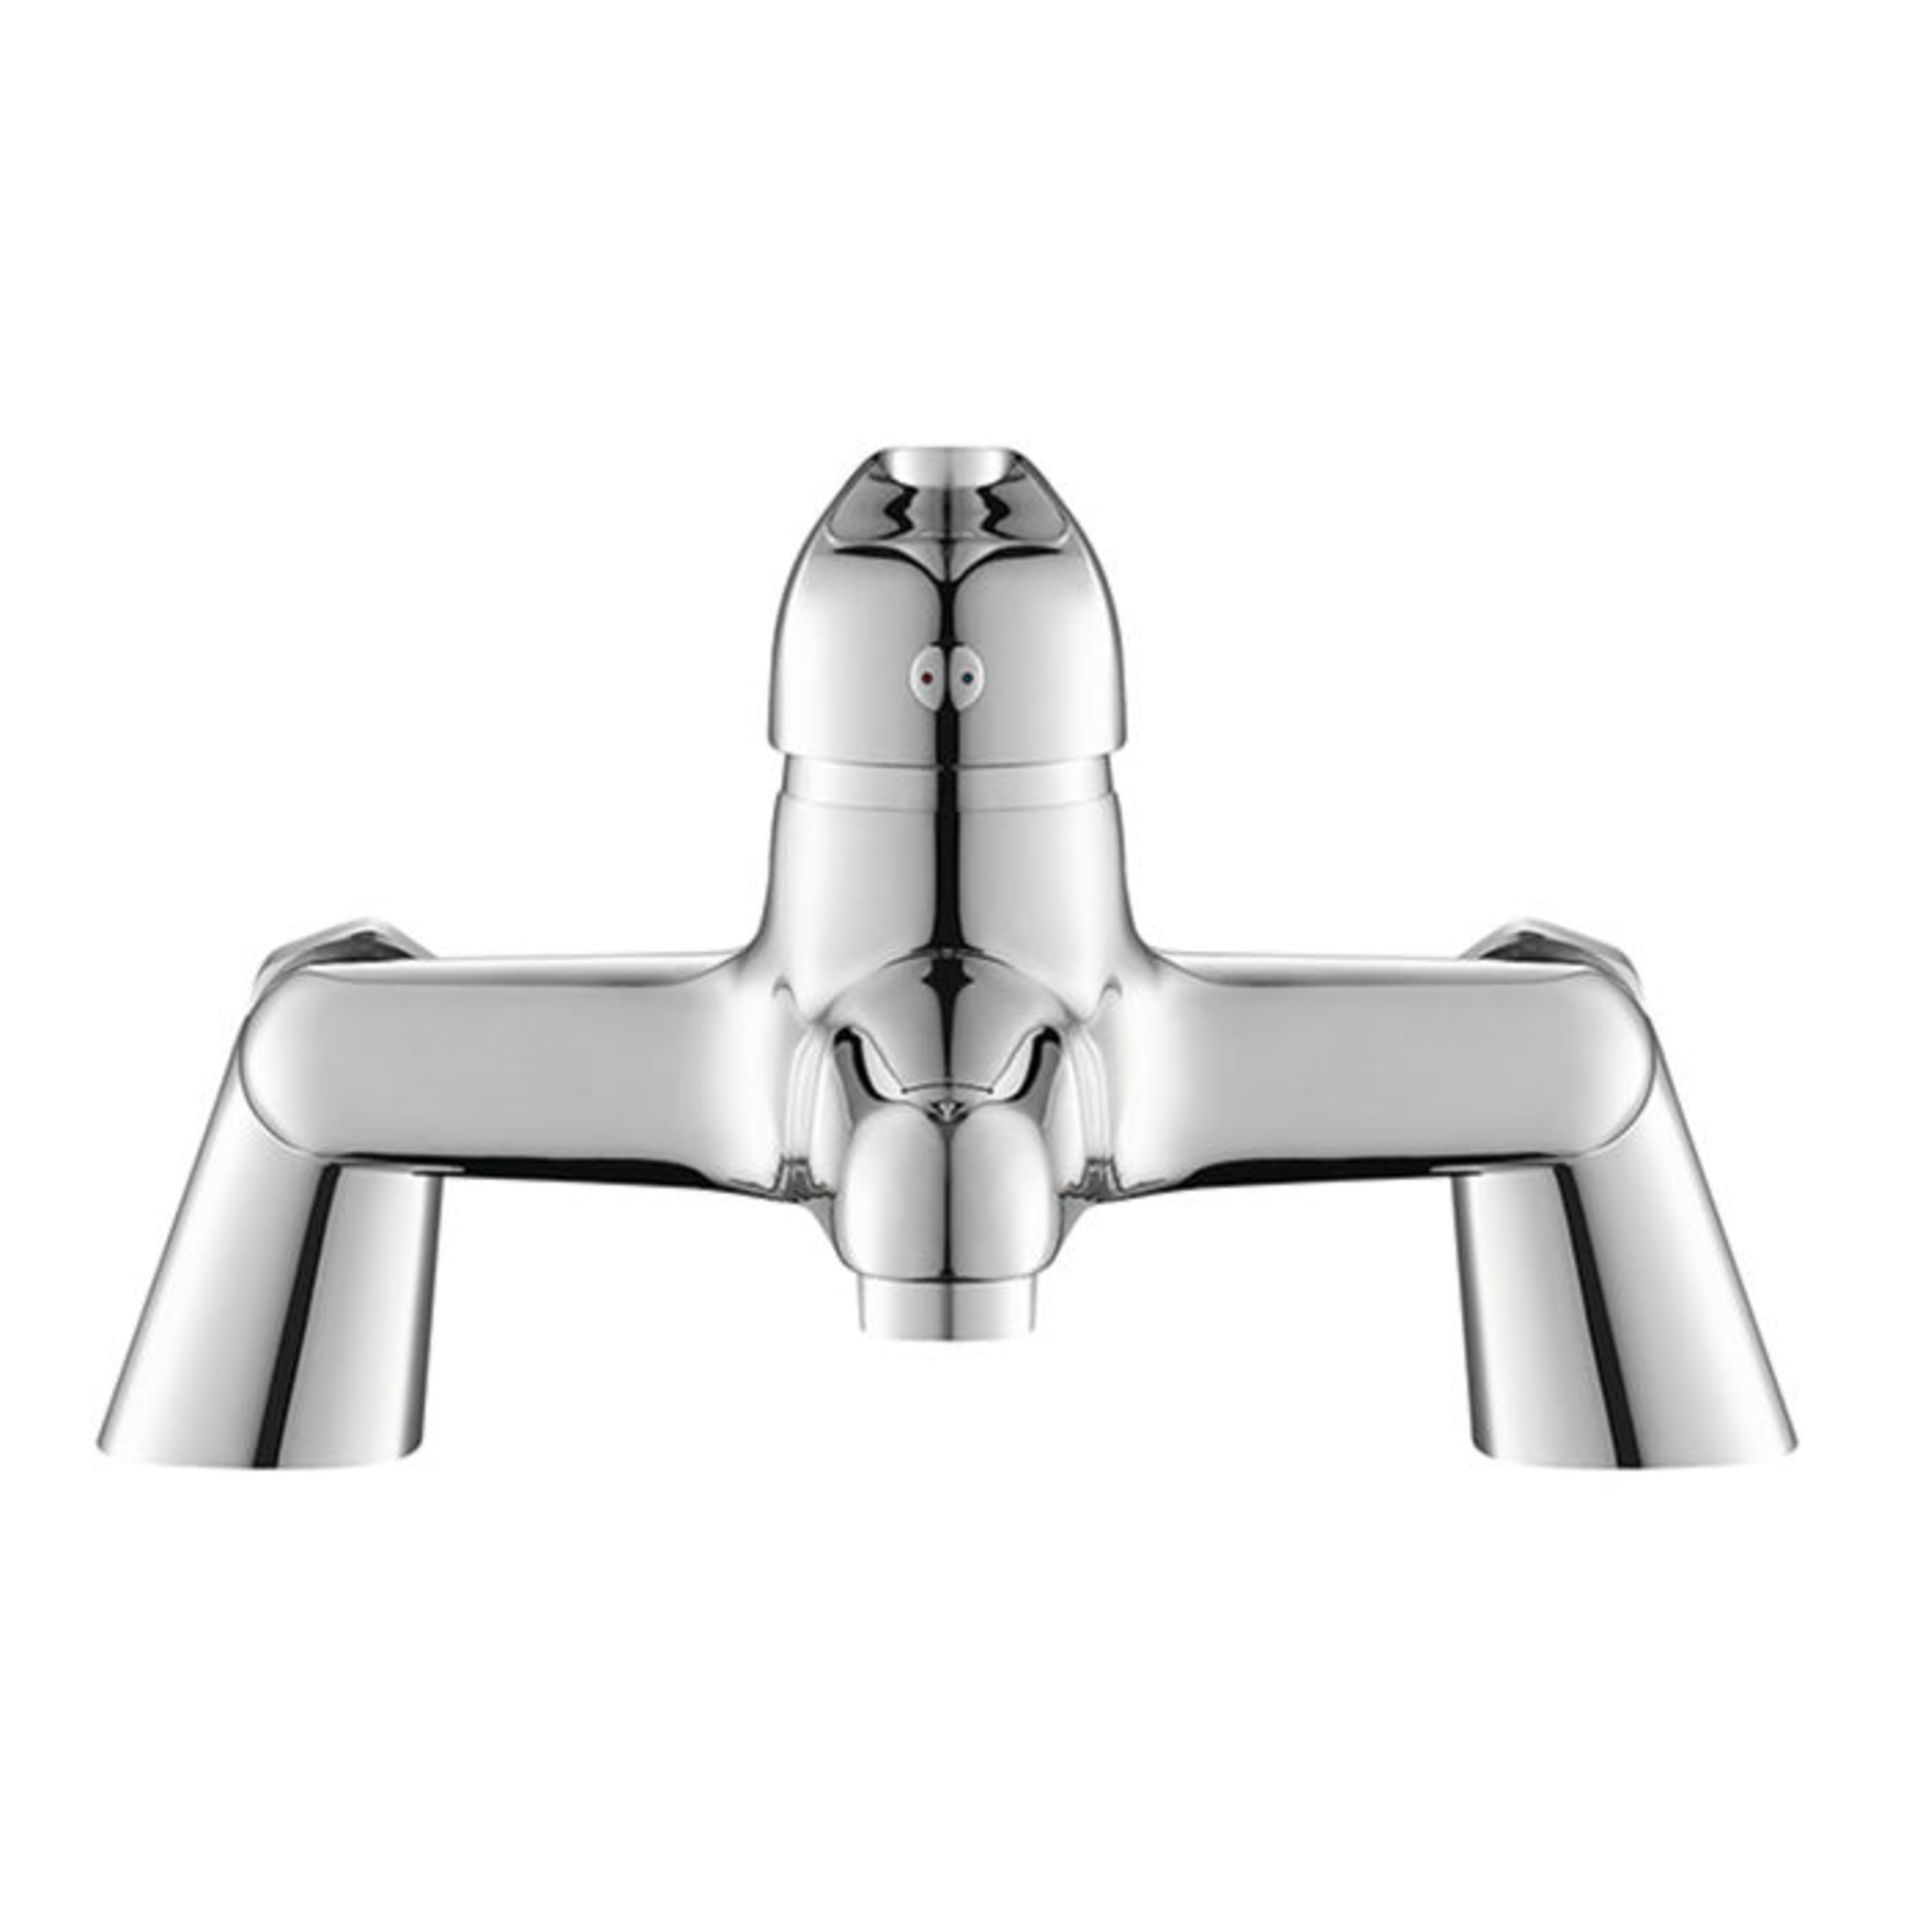 (V4) Sleek Bath Filler Mixer Tap. Chrome Plated Solid Brass 1/4 turn solid brass valve with - Image 3 of 3